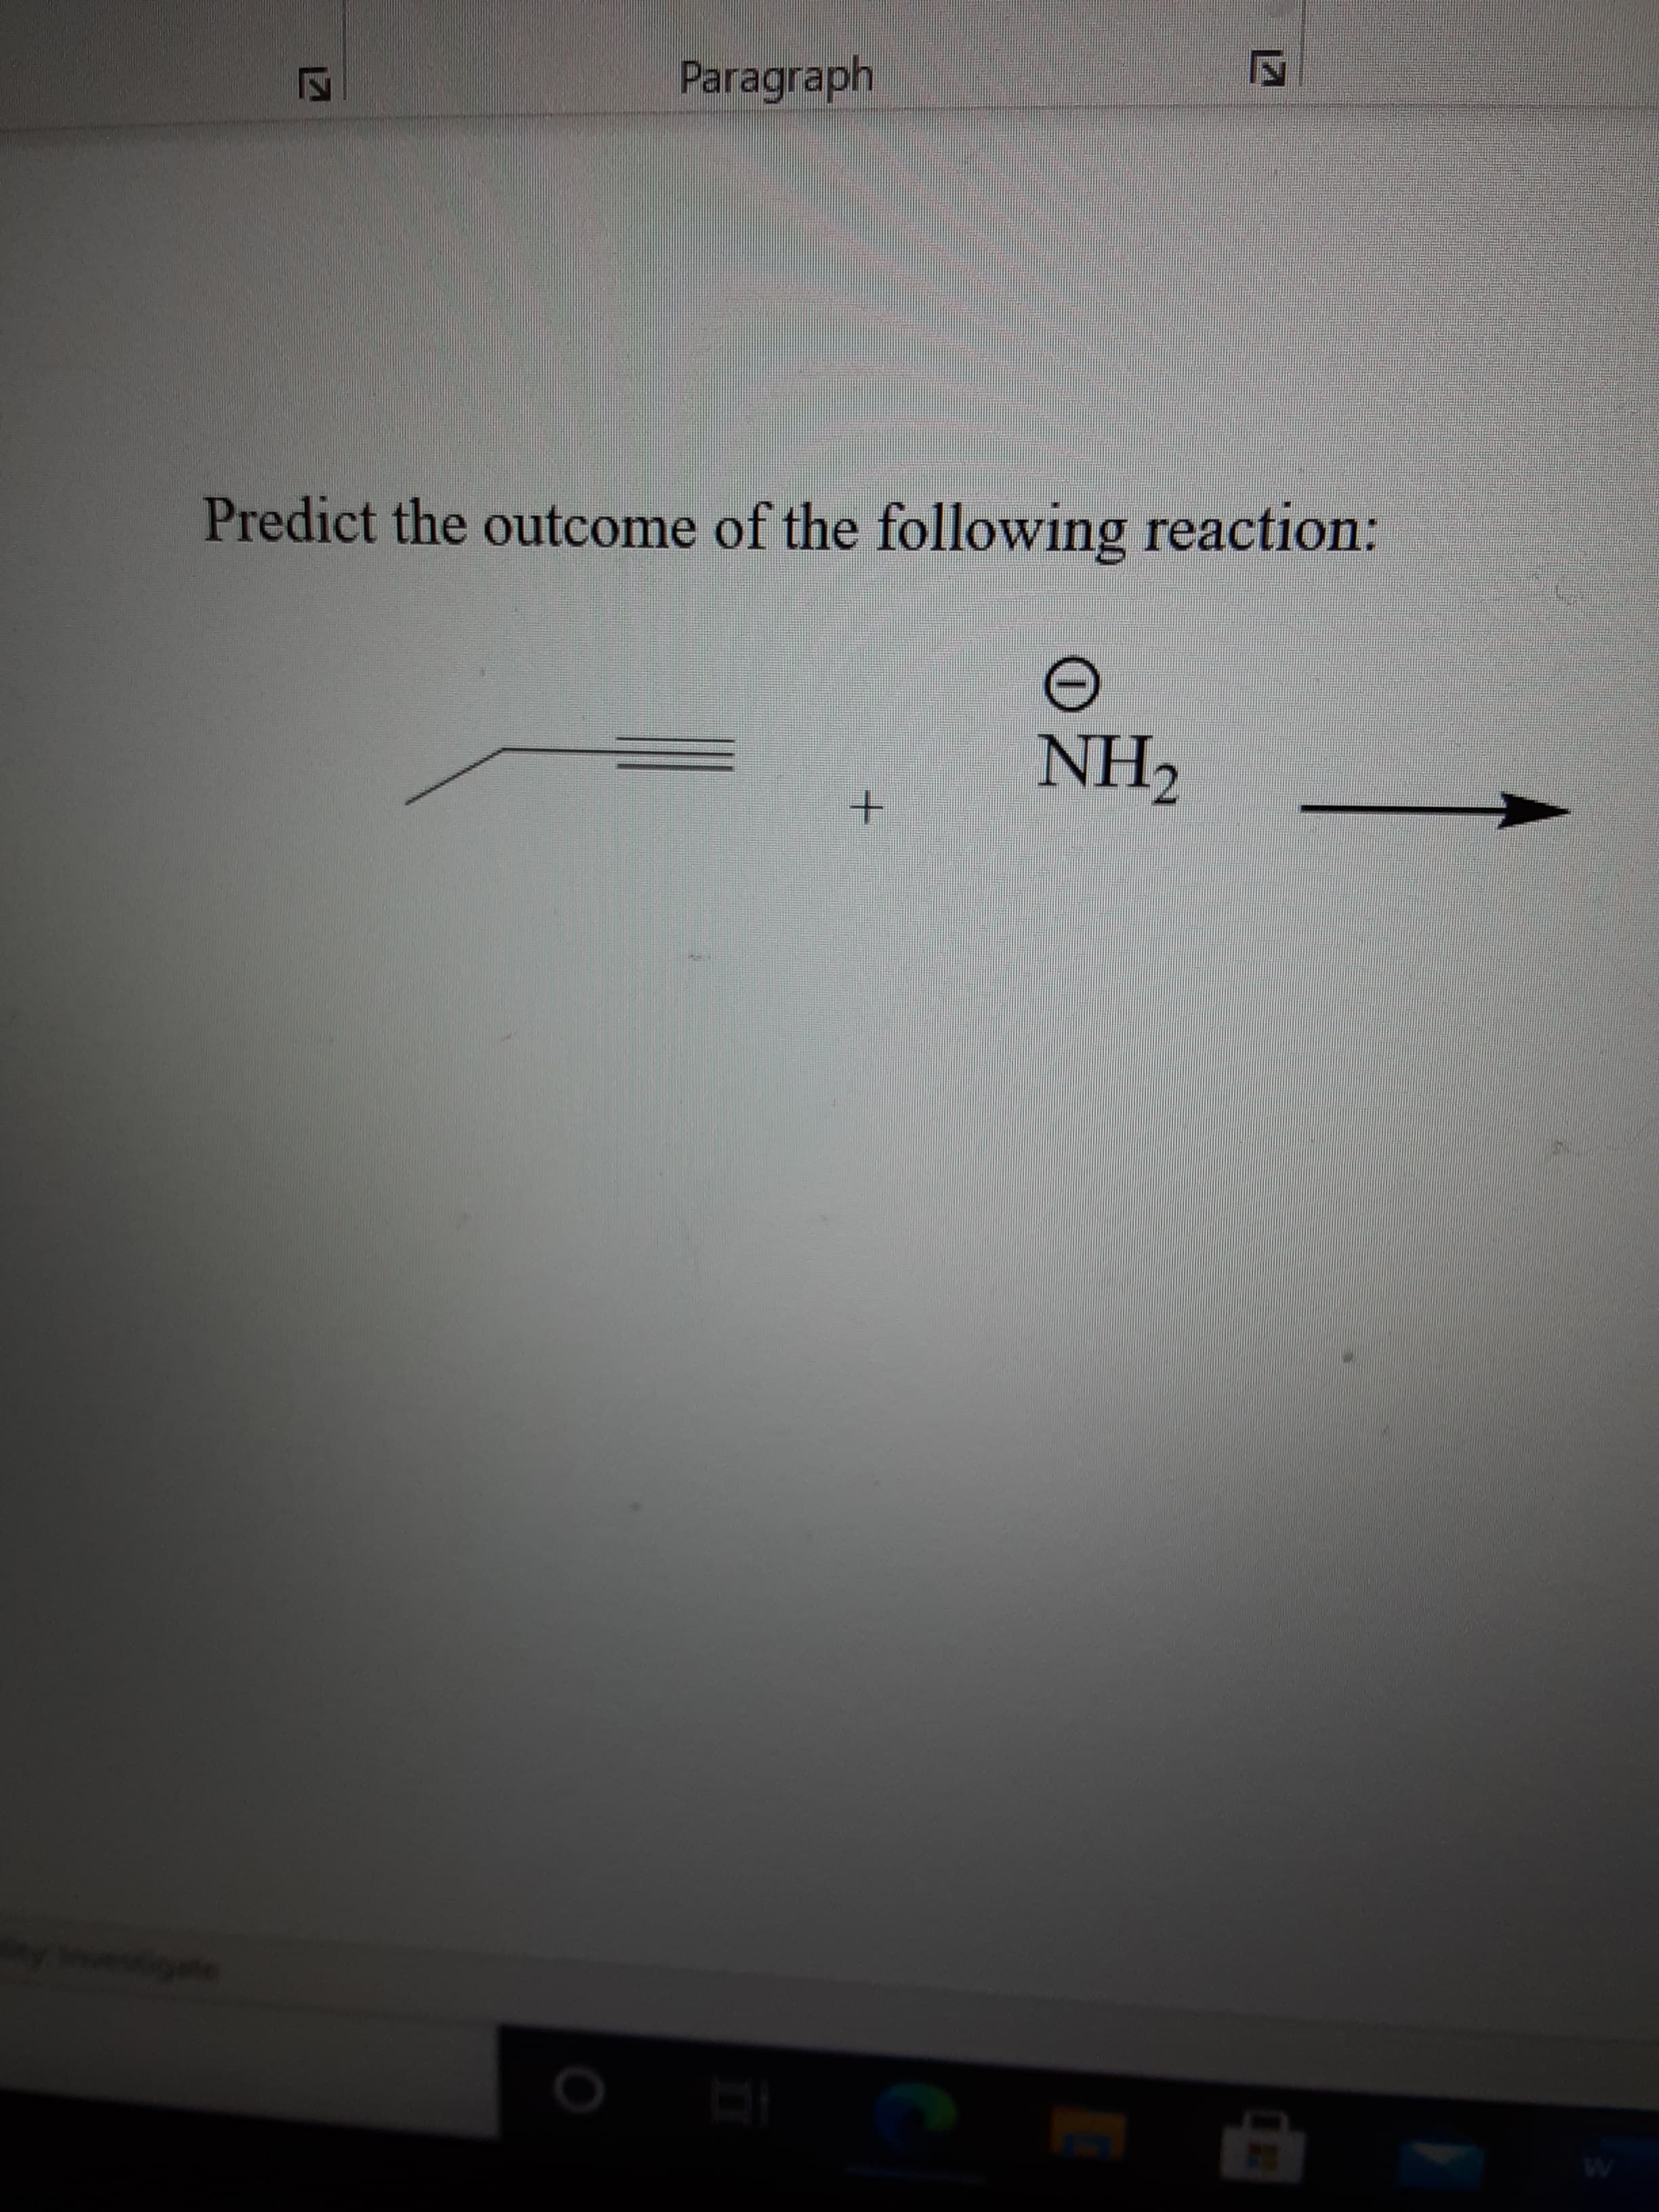 Paragraph
Predict the outcome of the following reaction:
NH2
